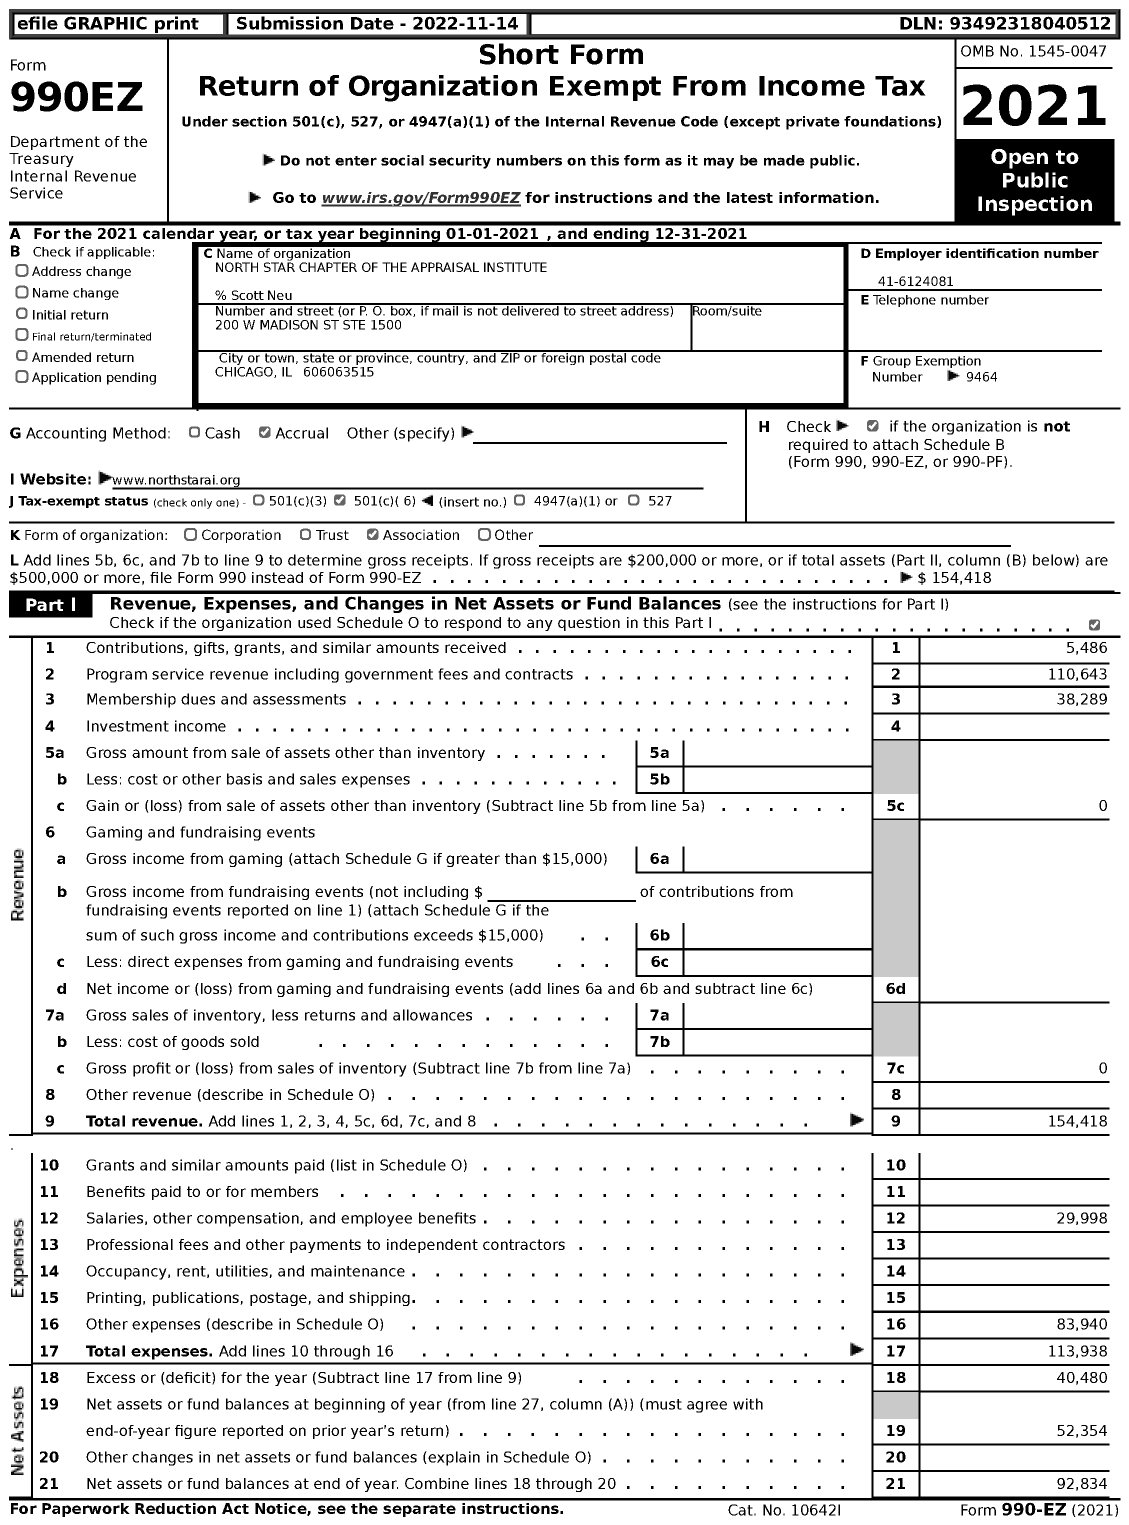 Image of first page of 2021 Form 990EZ for North Star Chapter of the Appraisal Institute